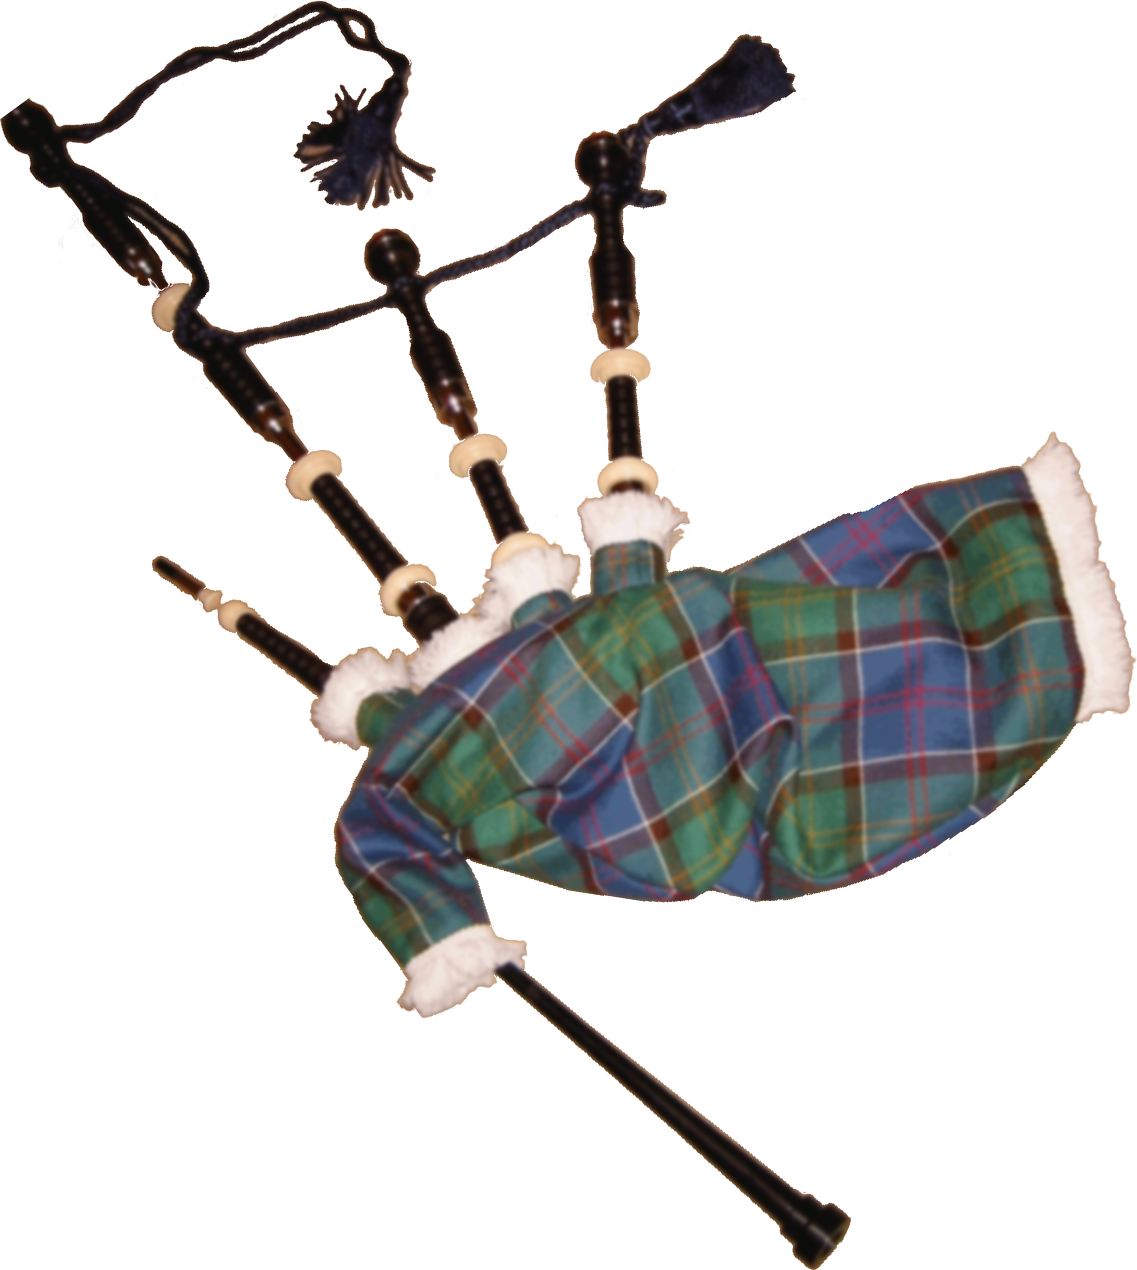 Bagpipe Clip Art - Bagpipes Clipart